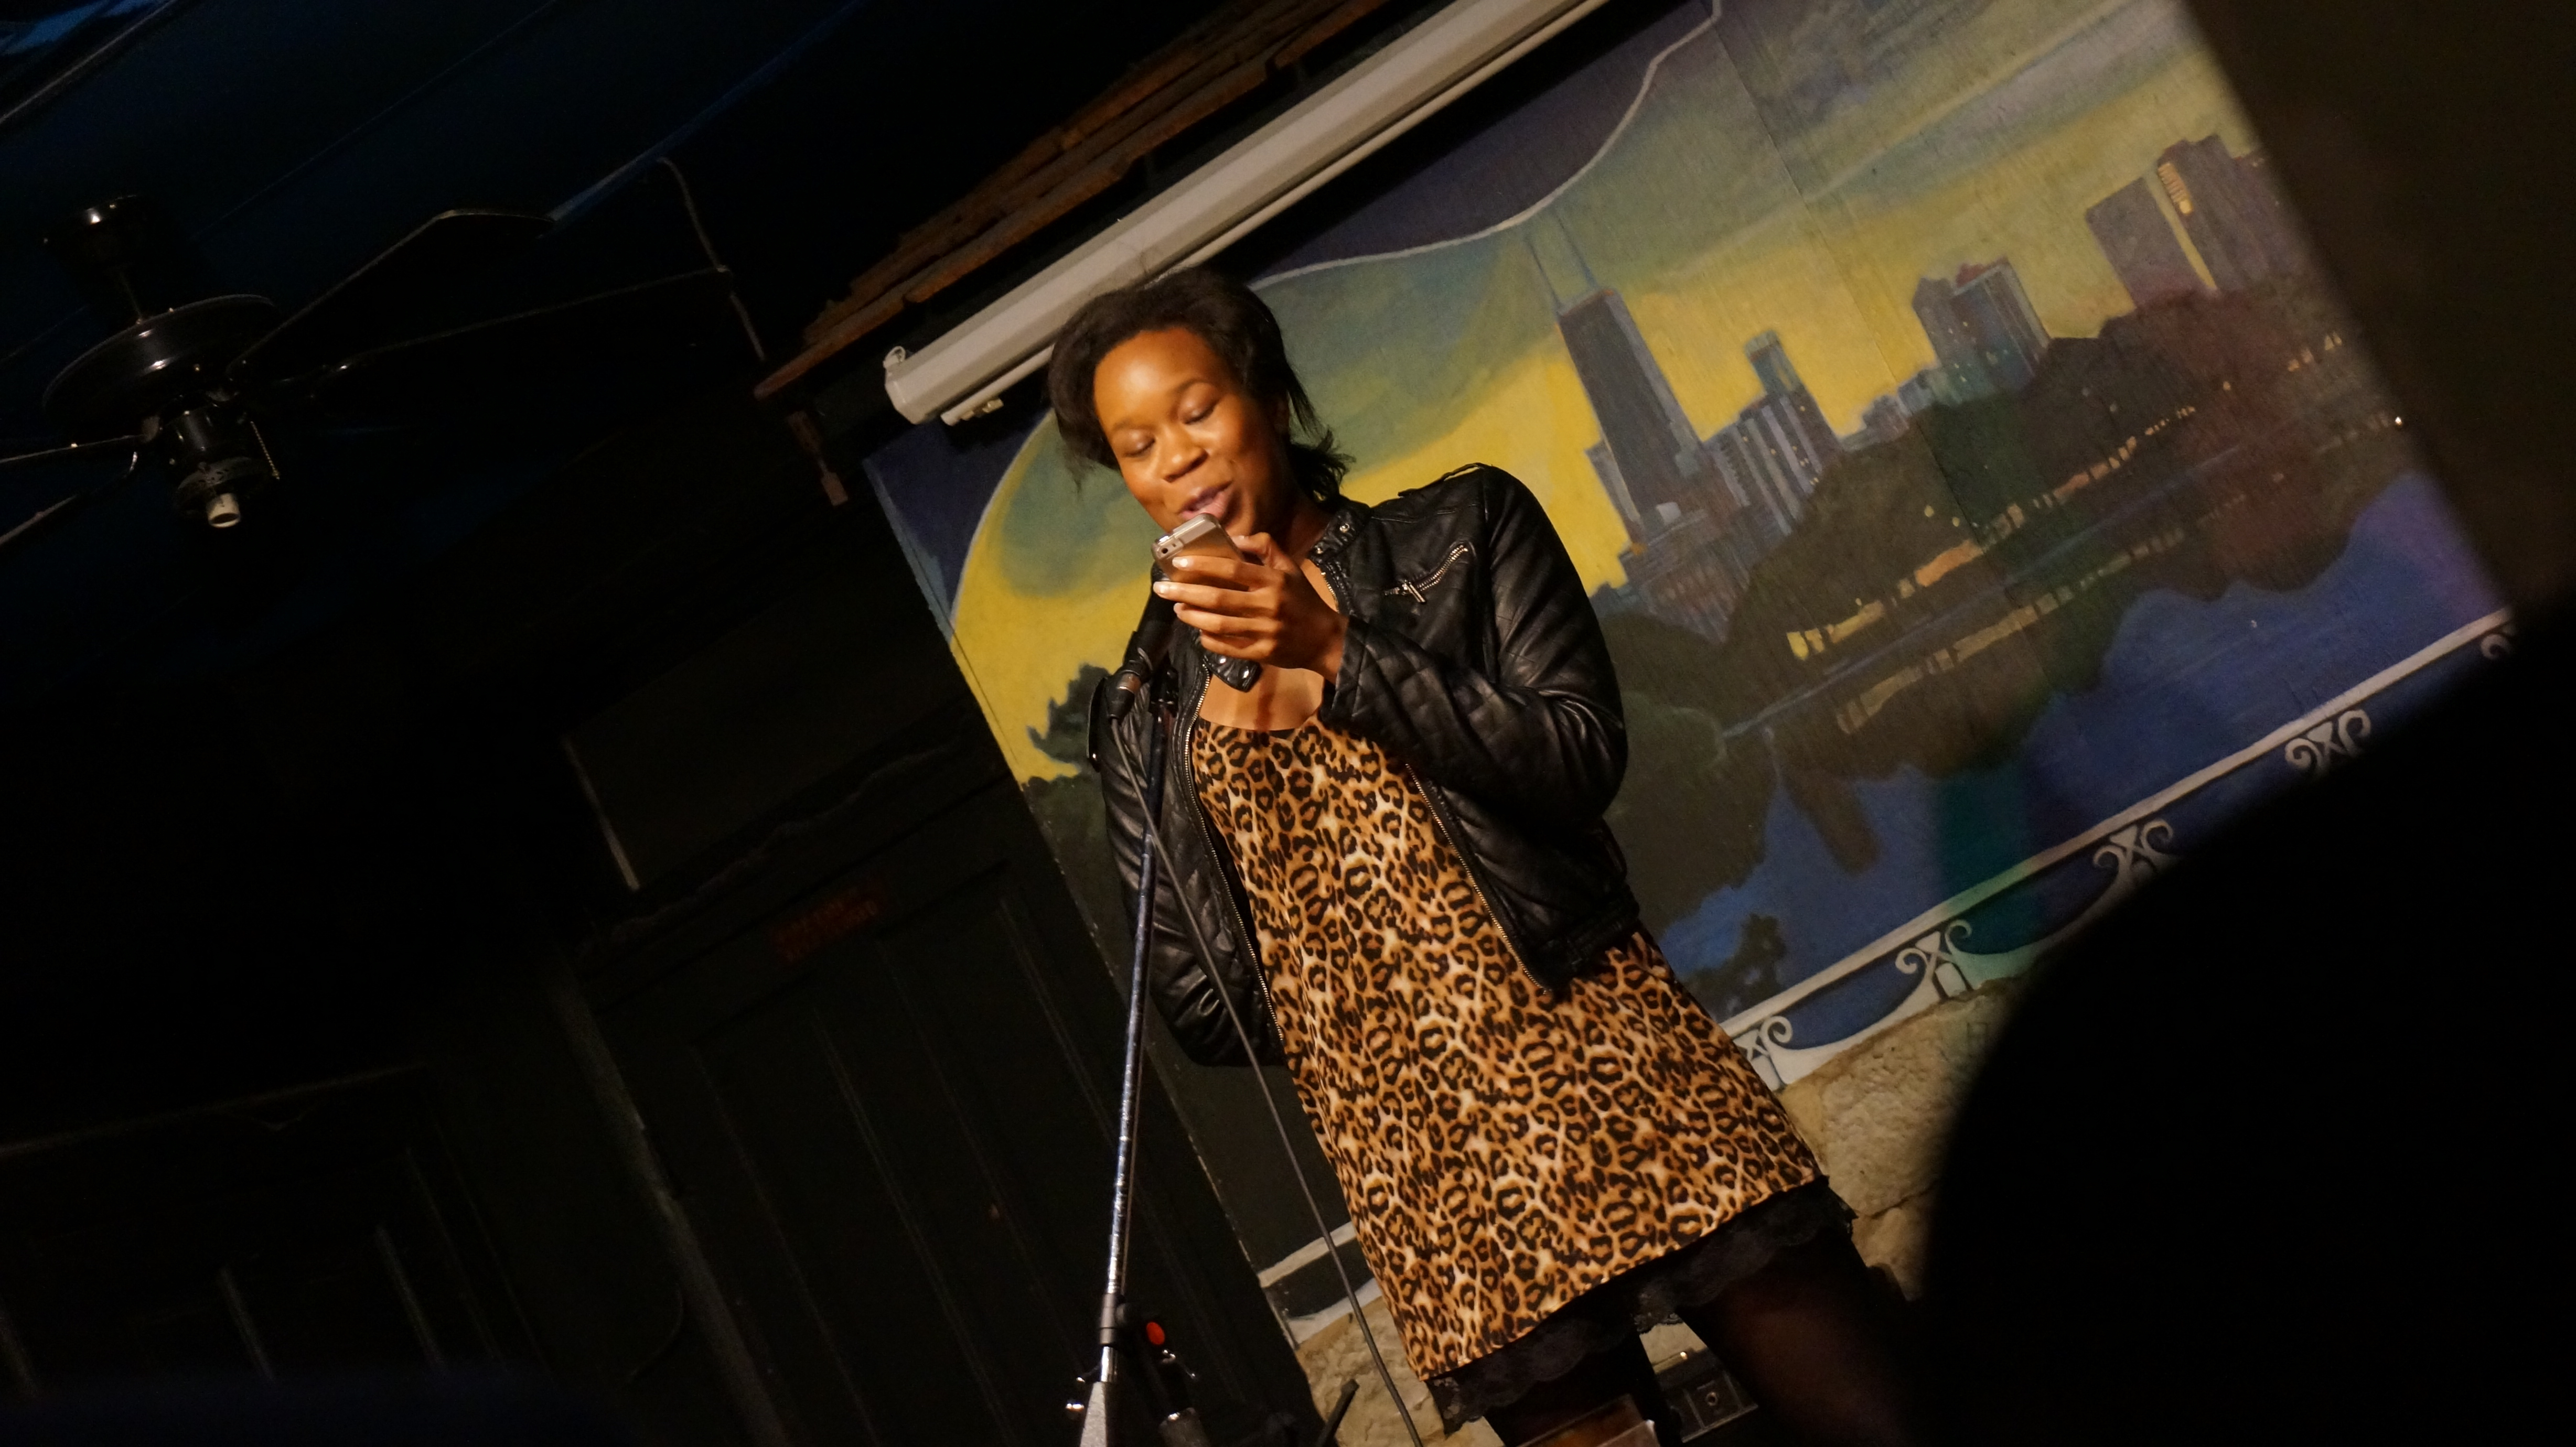 Image: Photo of Britt Julious performing on-stage at Miss Spoken at the Gallery Cabaret. Julious stands on-stage, speaking into the microphone while looking at a phone. Julious wears a black jacket over an animal-print dress with black trim. The reader appears in medium-long-shot at the center side of the frame, which is skewed at a diagonal. Painted on the stage wall behind the reader is a scene showing Chicago’s skyline, as if viewed from behind a stone wall. Photo by Sarah Joyce. Courtesy of Miss Spoken.